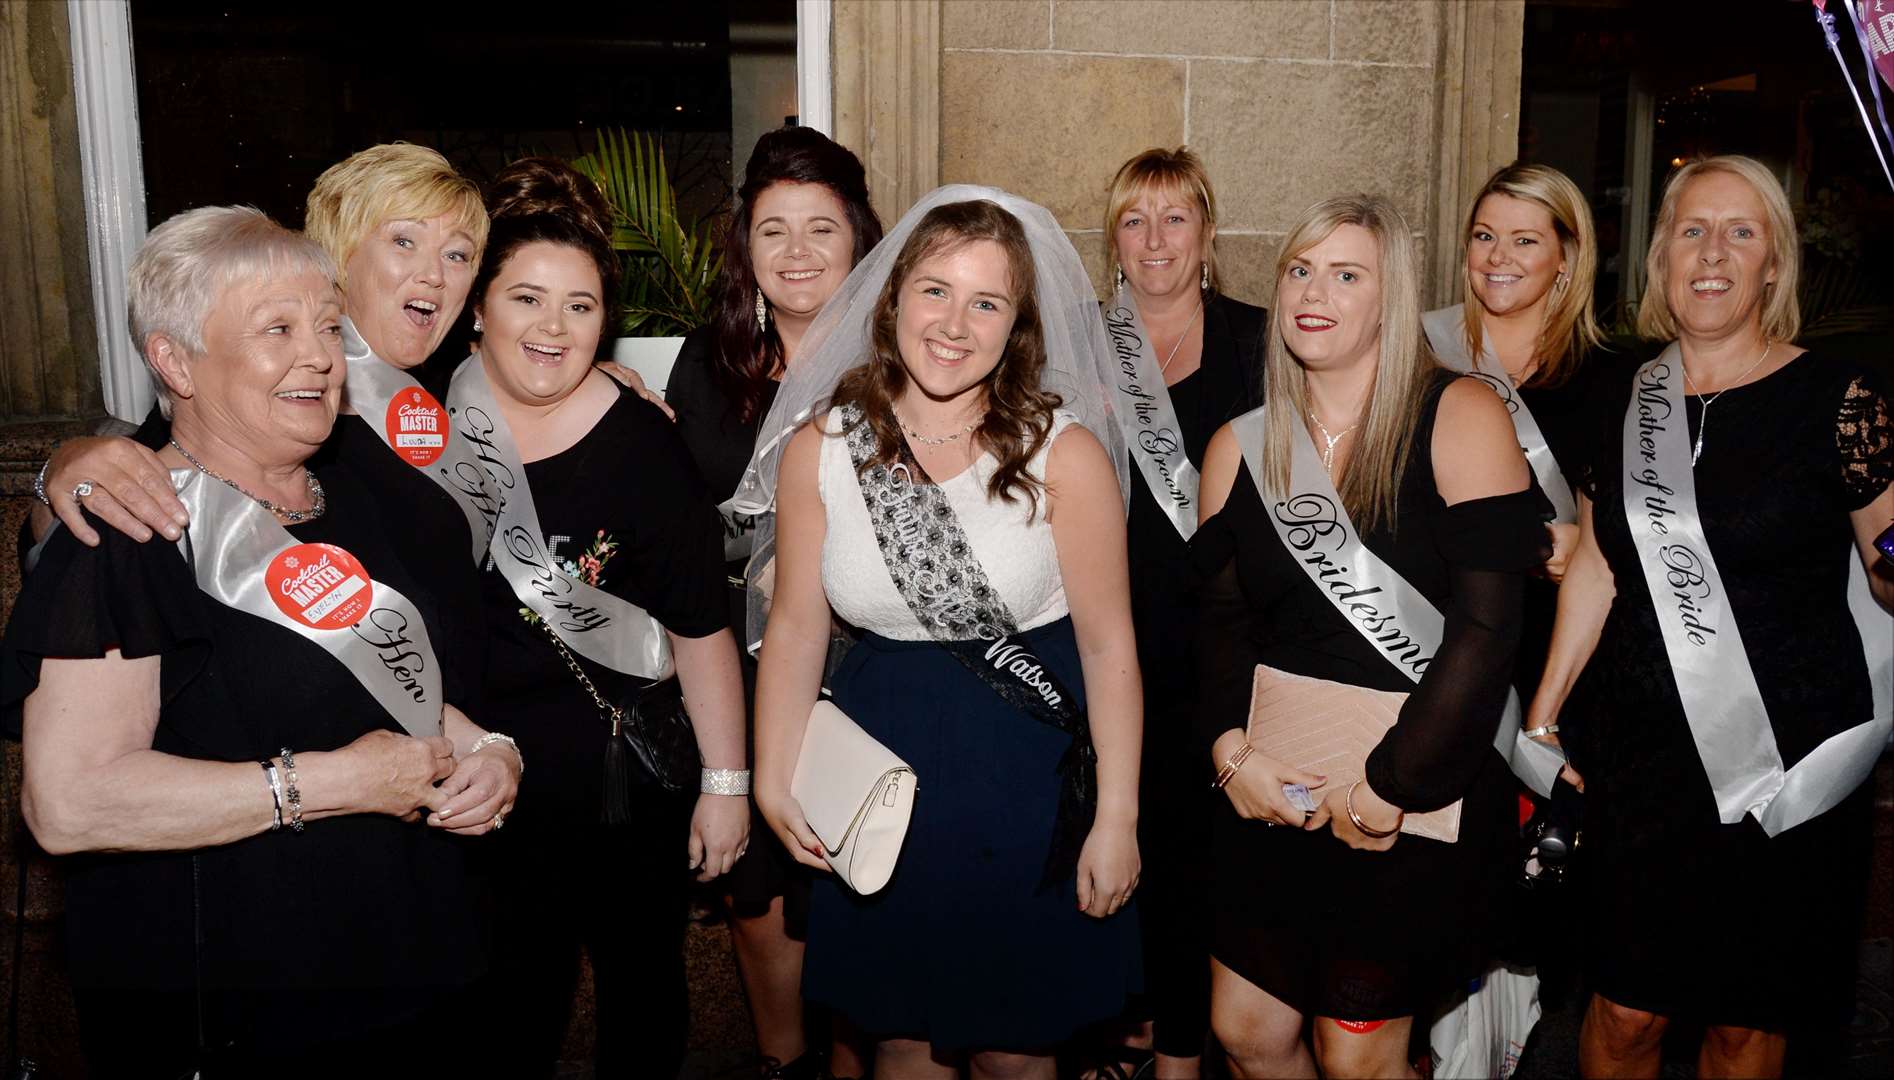 July bride to be Gemma Reid (centre) on her hen party...City Seen 16 06 18.Picture: Gair Fraser. Image No. 041183..